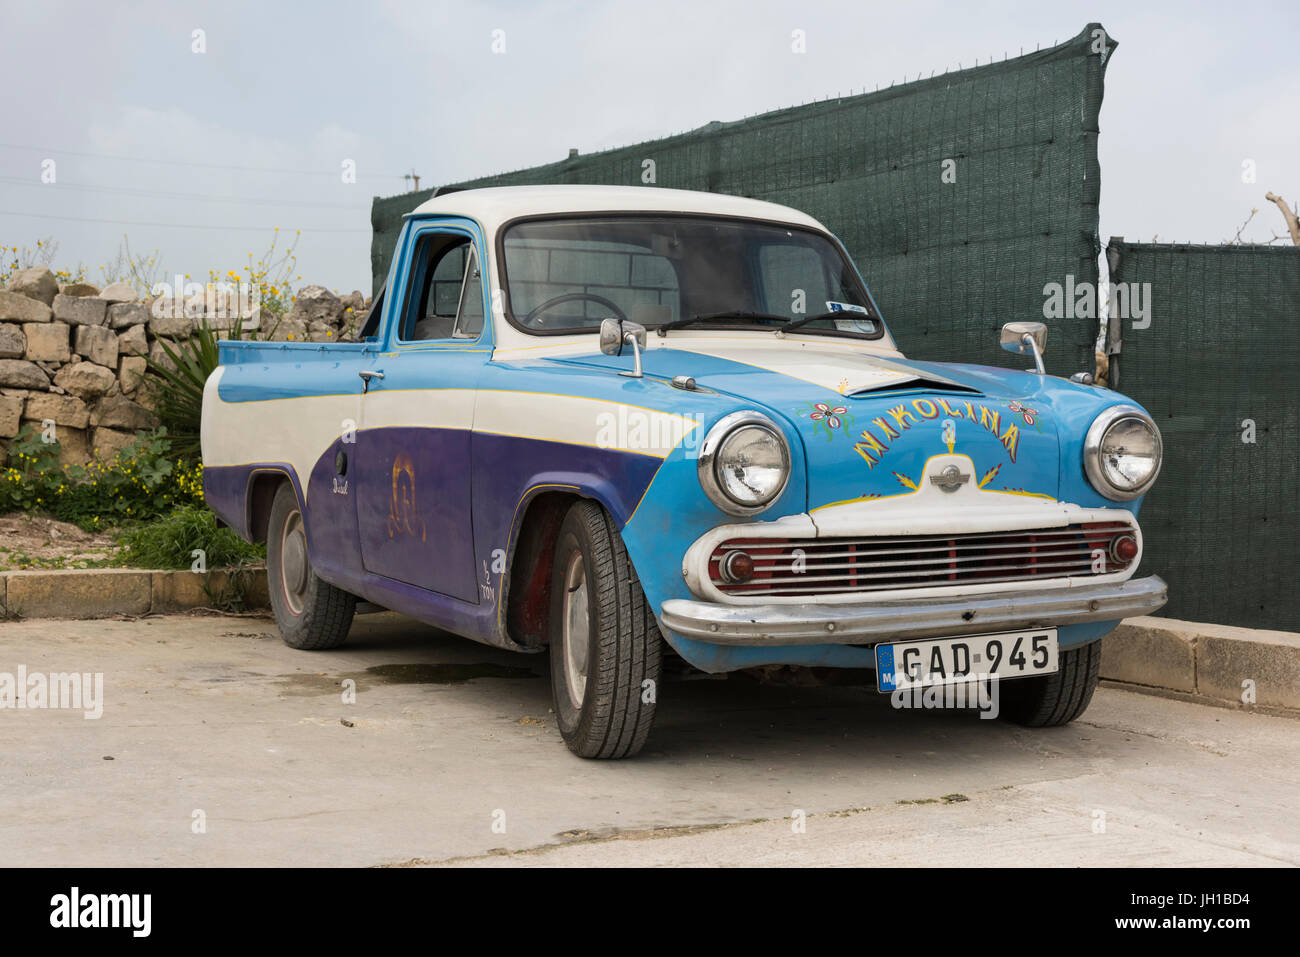 An old austin a55 pick up car or truck in Malta Stock Photo